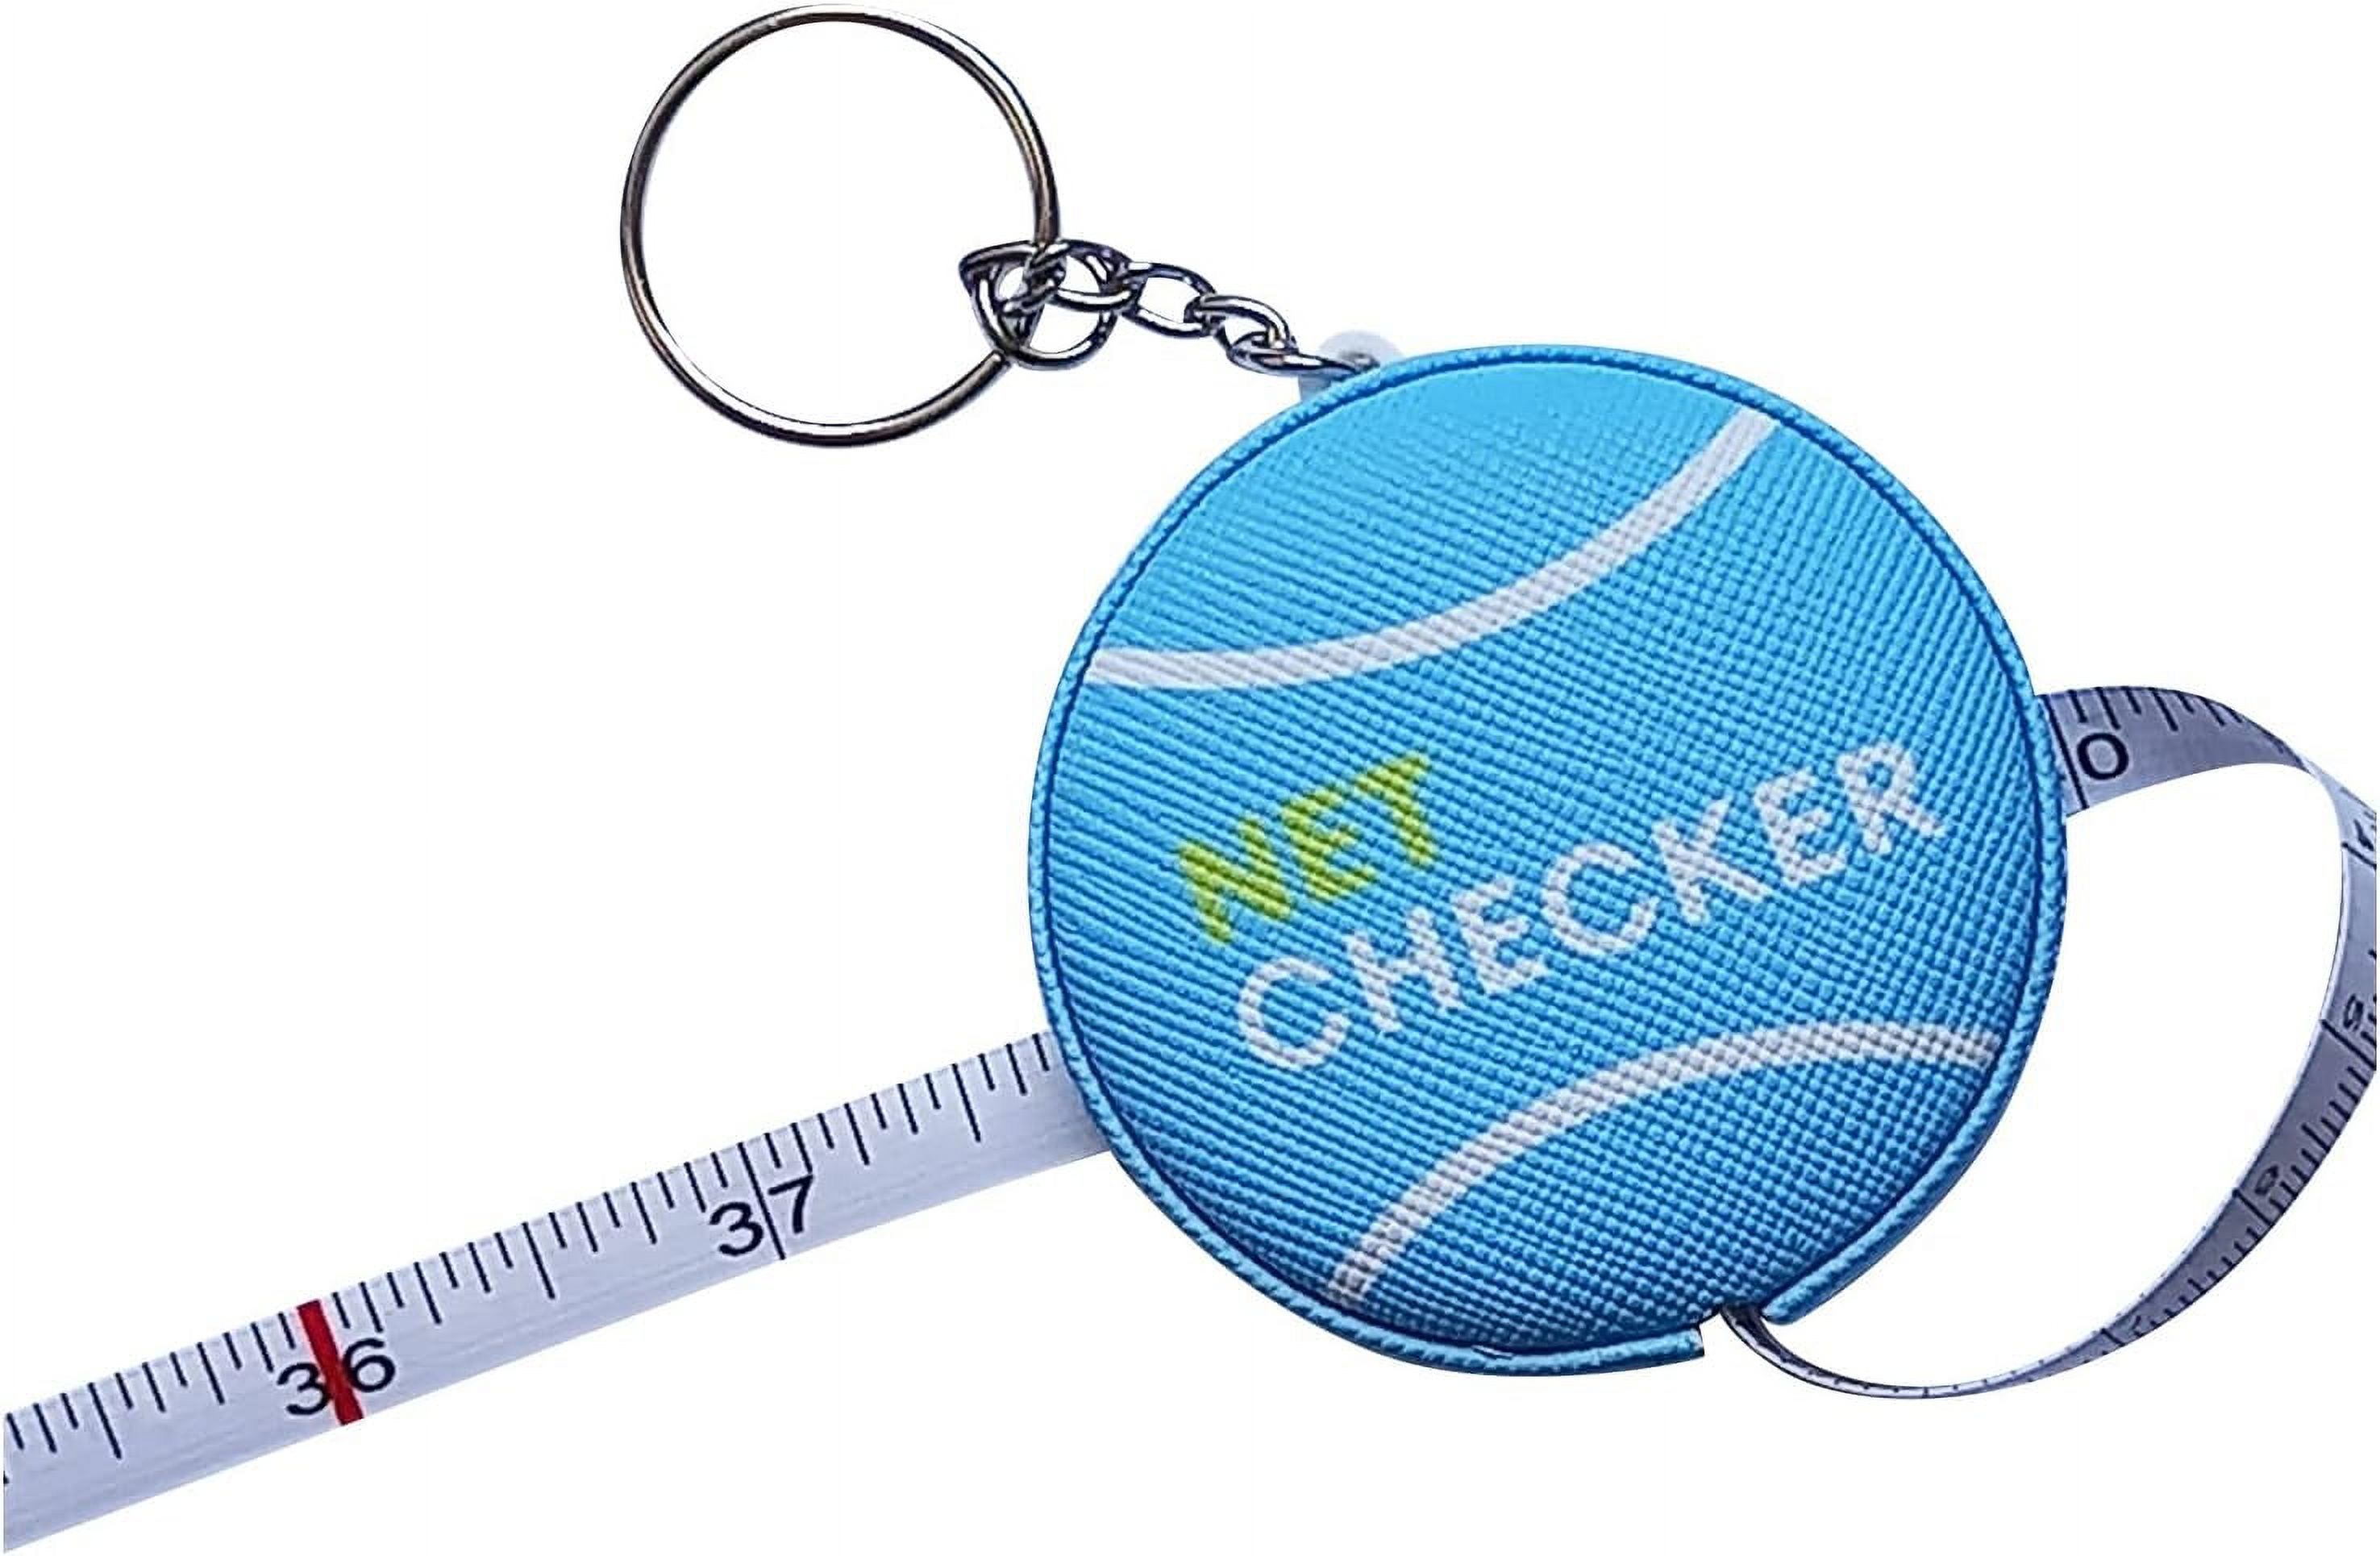 Tennis Net Height Mini Measuring Tape And Keyring, Portable 59 Inch Flexible  Measuring Tape For Measuring Tennis Net Height 